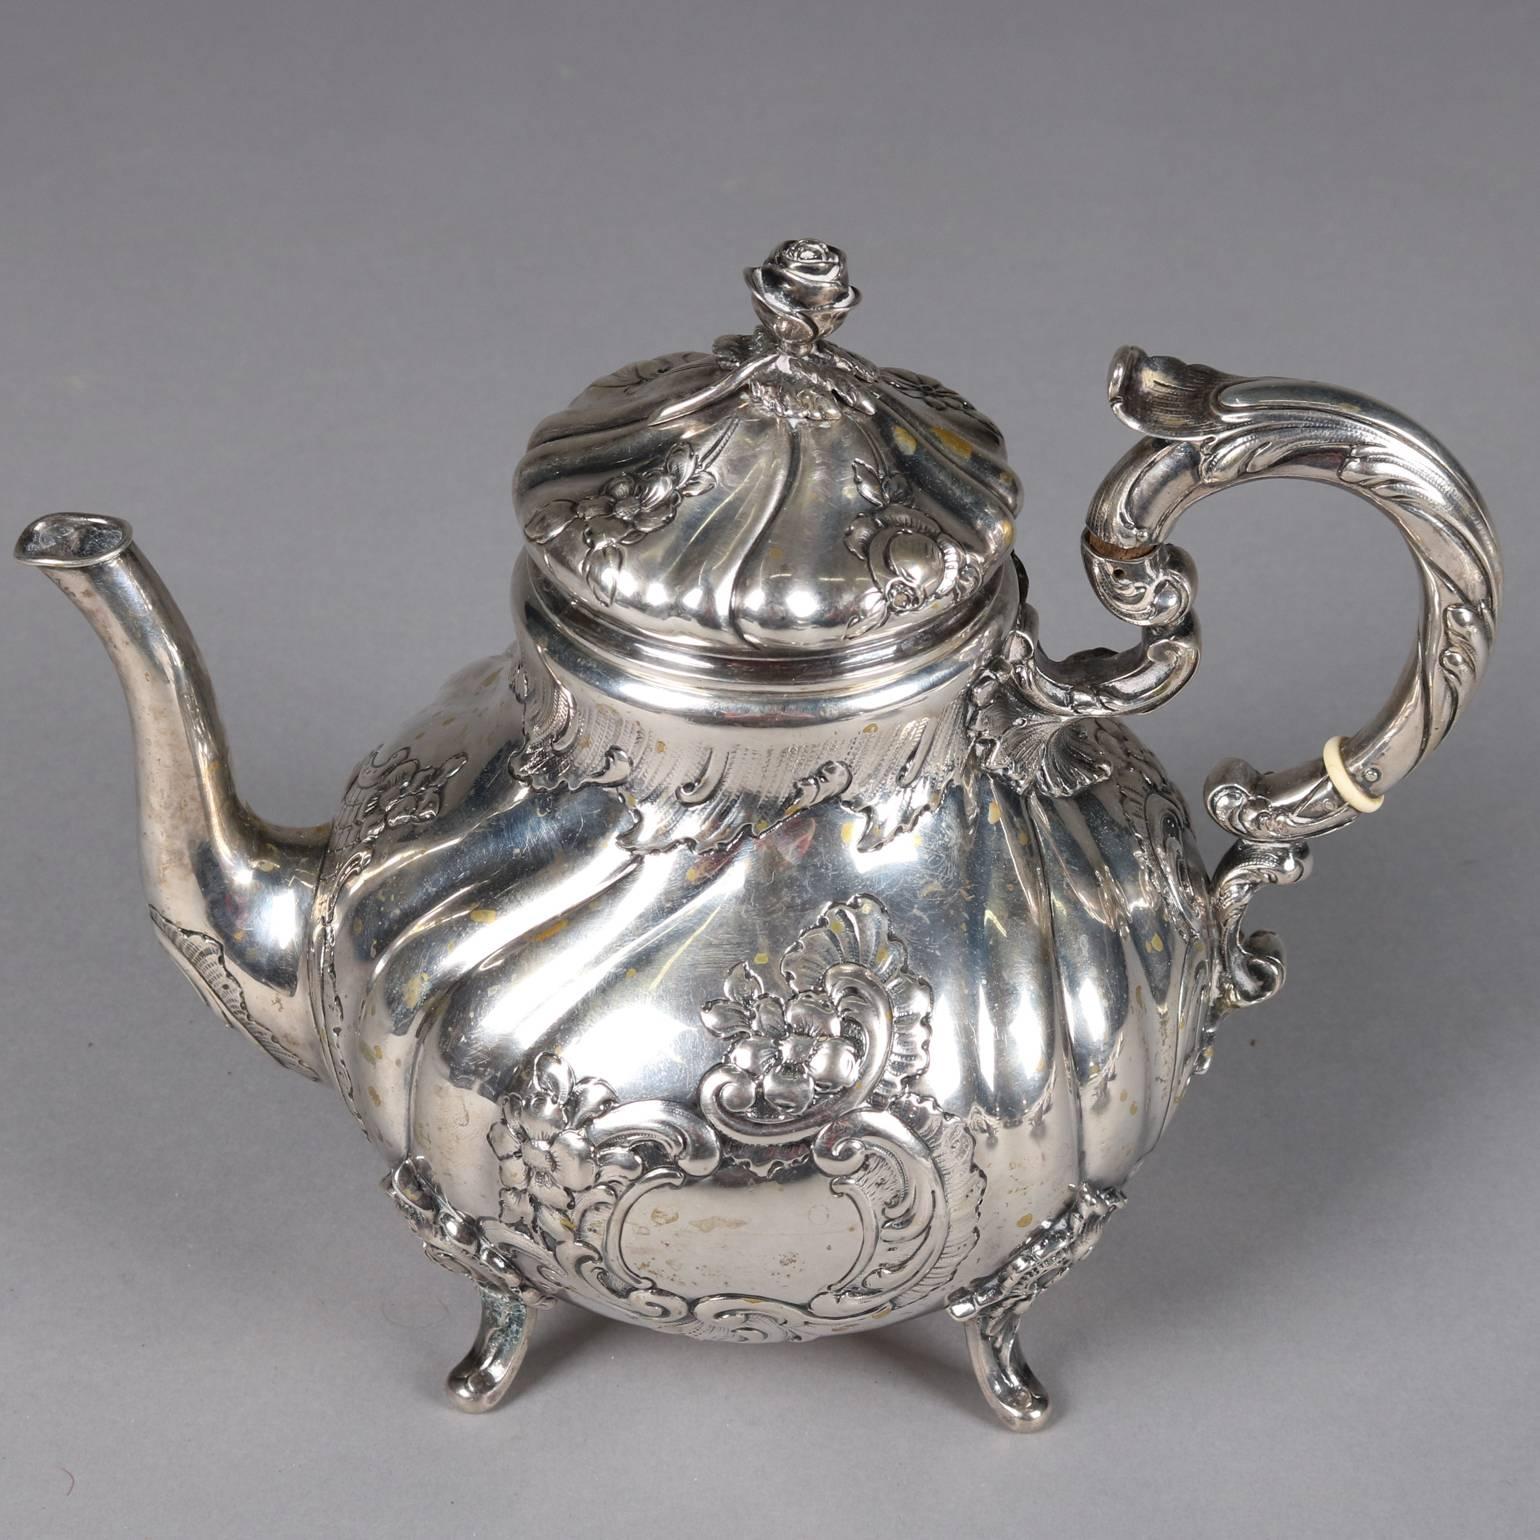 Antique .800 Silver Footed Teapot, Gadroon and Foliate Decorated, 19th Century 3